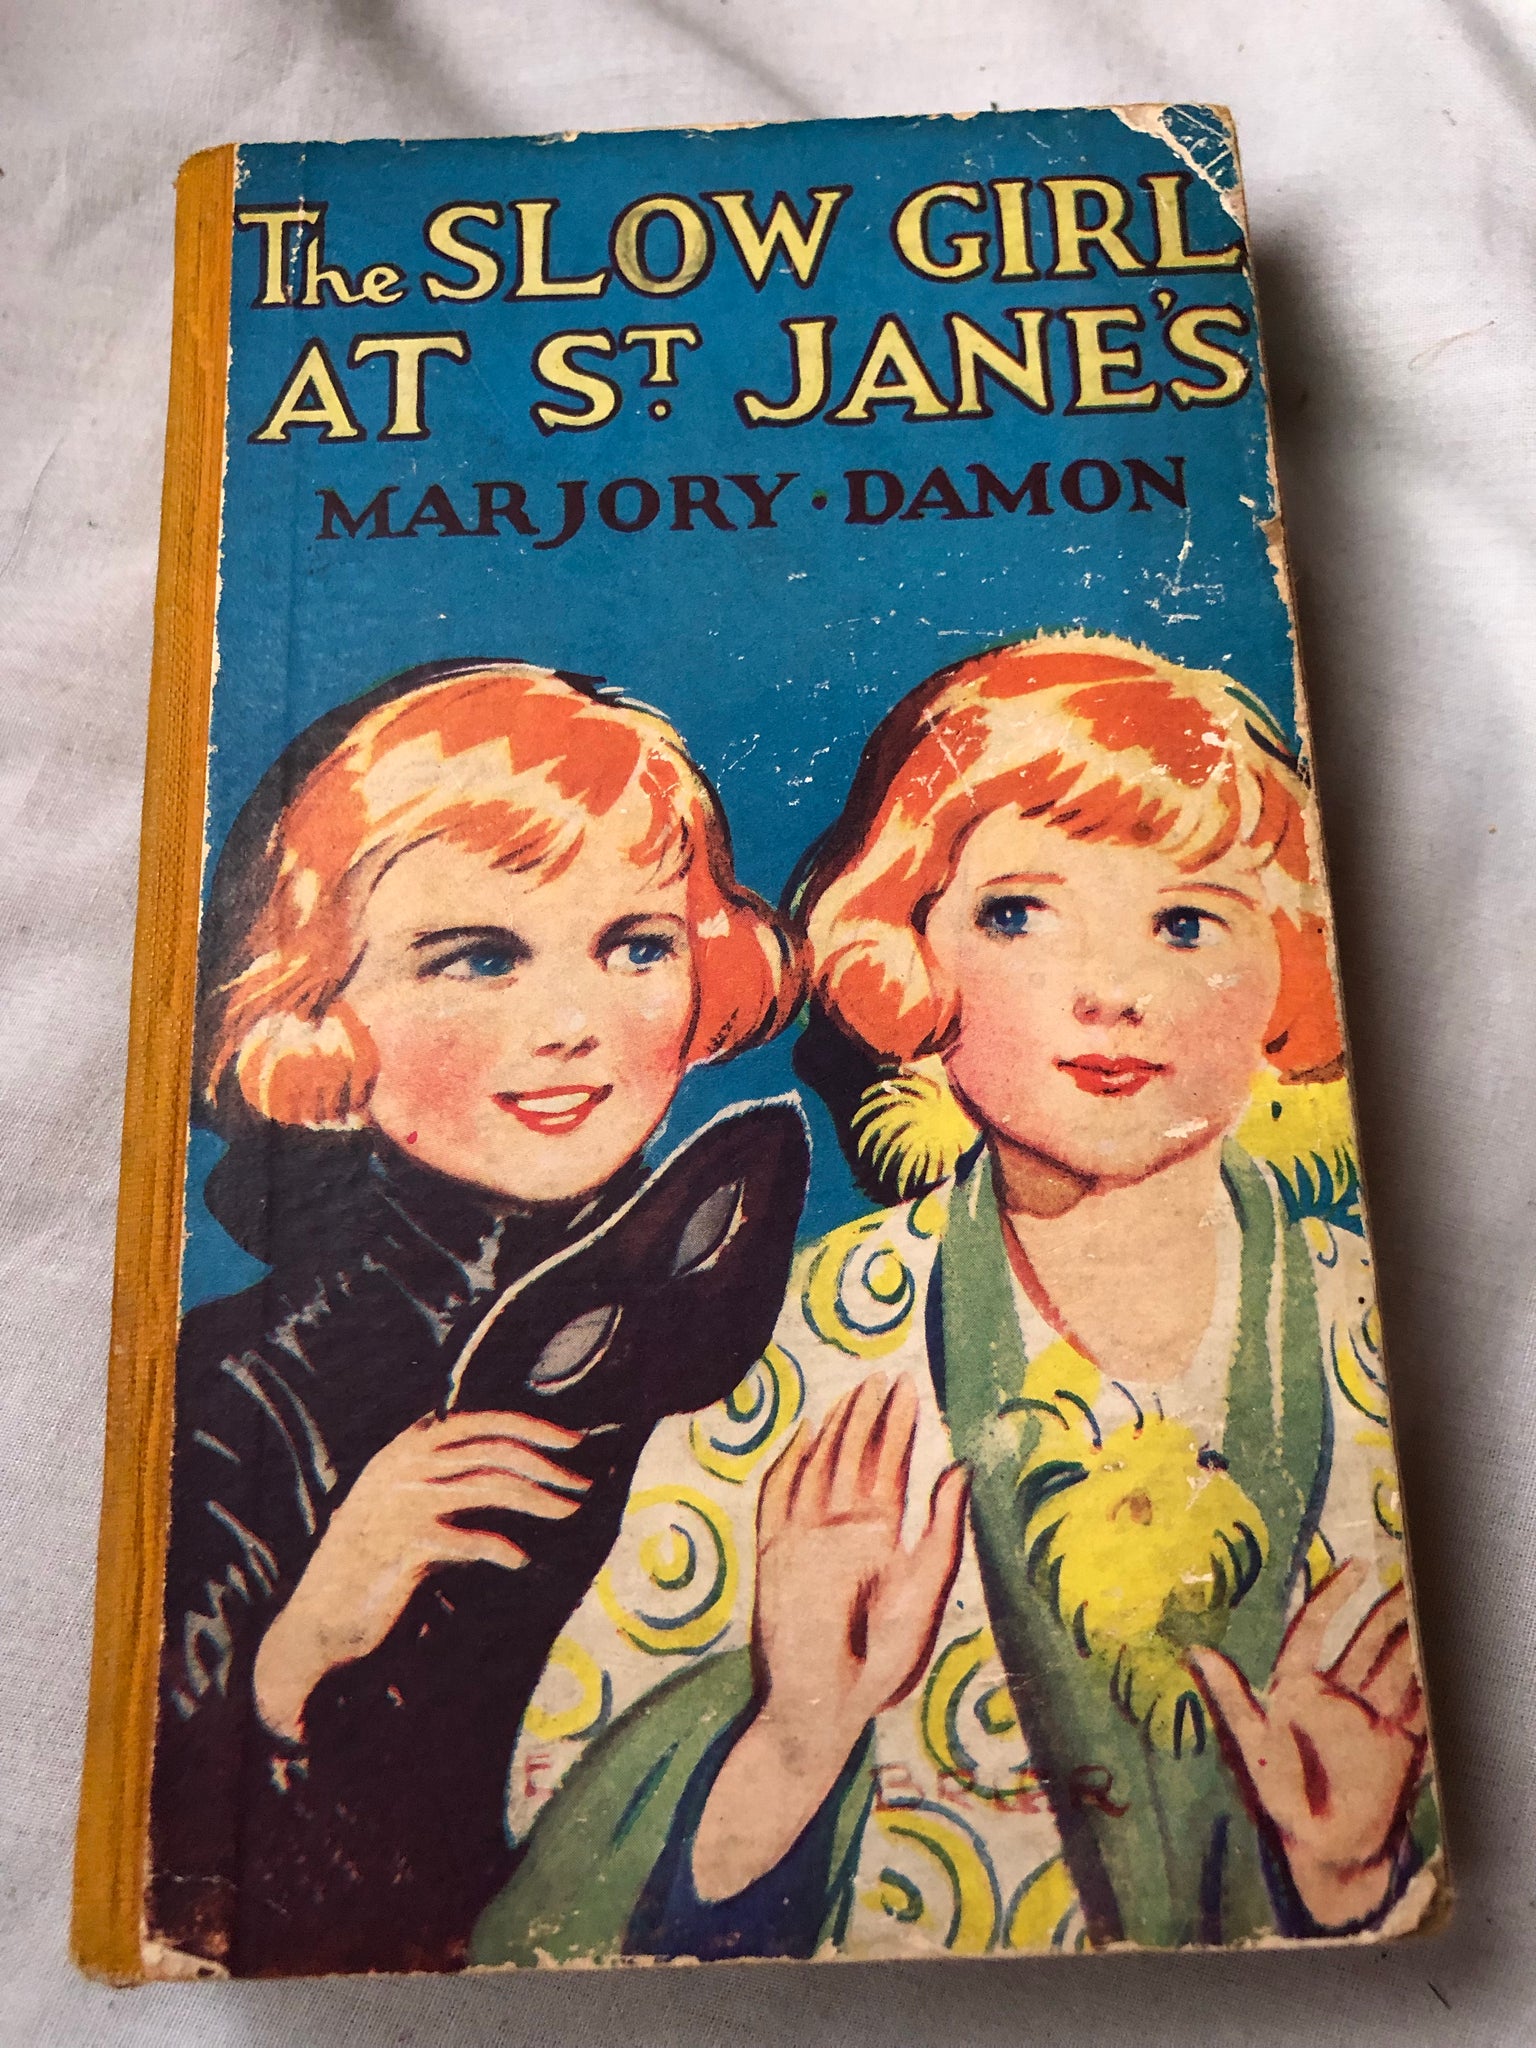 The Slow Girl At St Janes by Marjory Damon (Hardback Circa 1930)